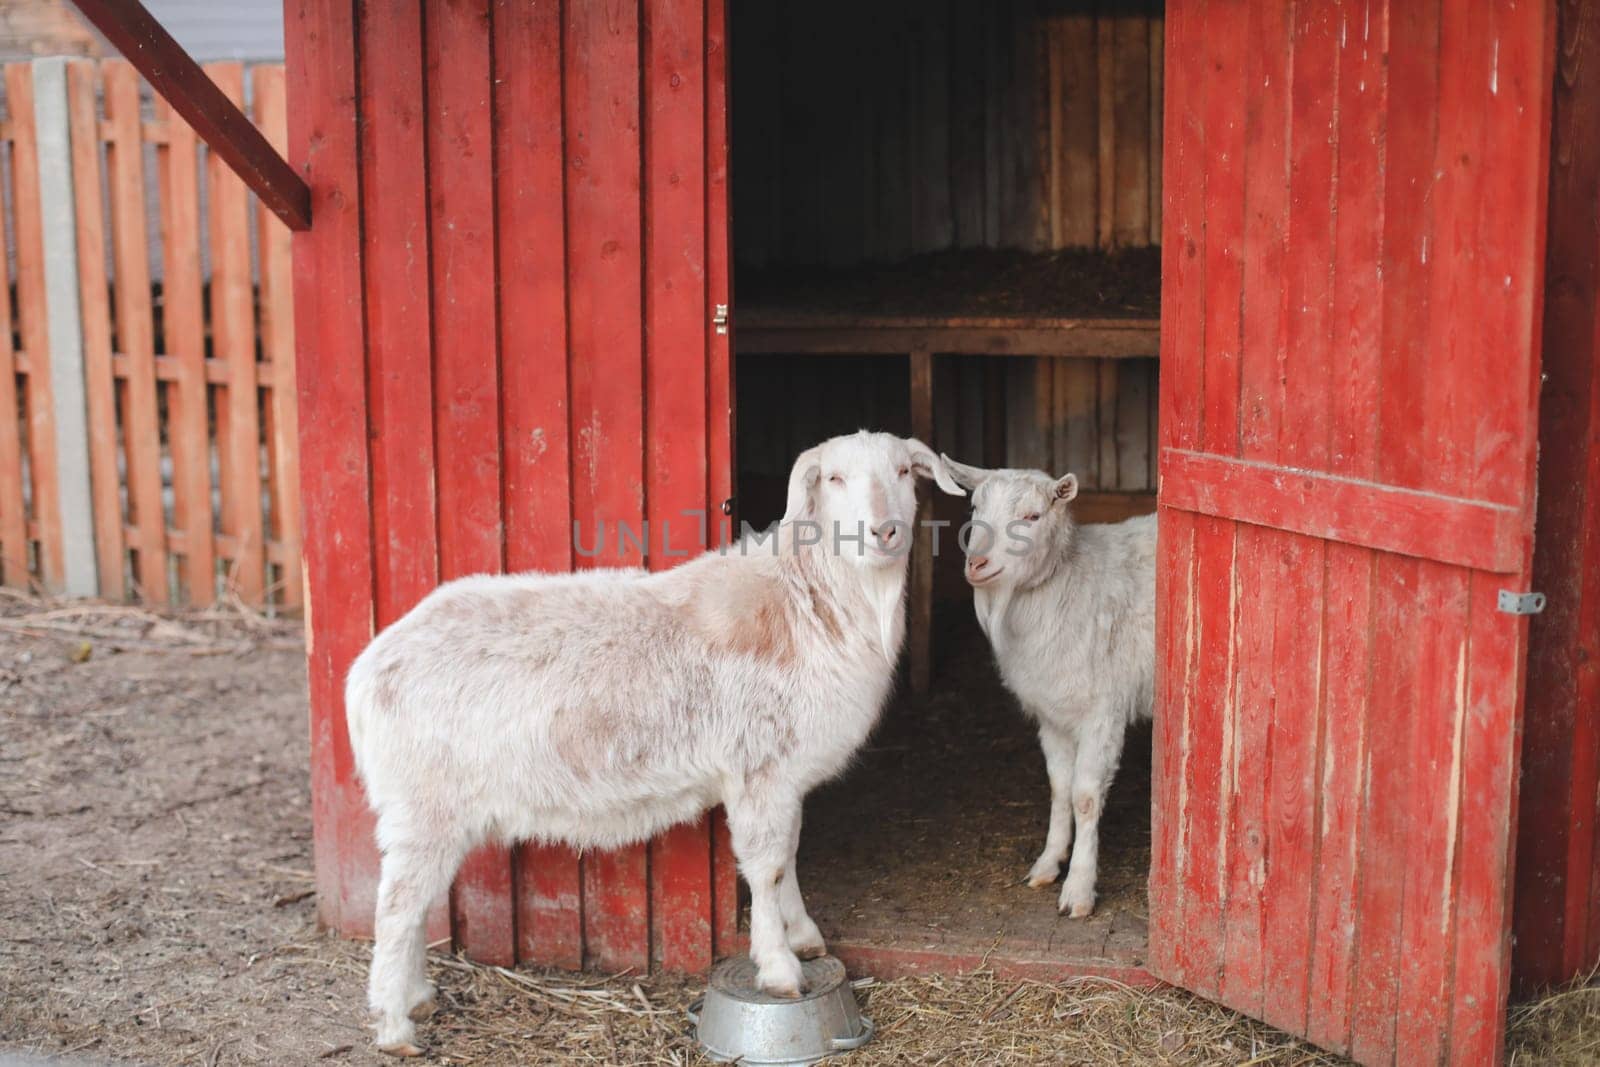 Lovely couple of two goats standing in wooden shelter.